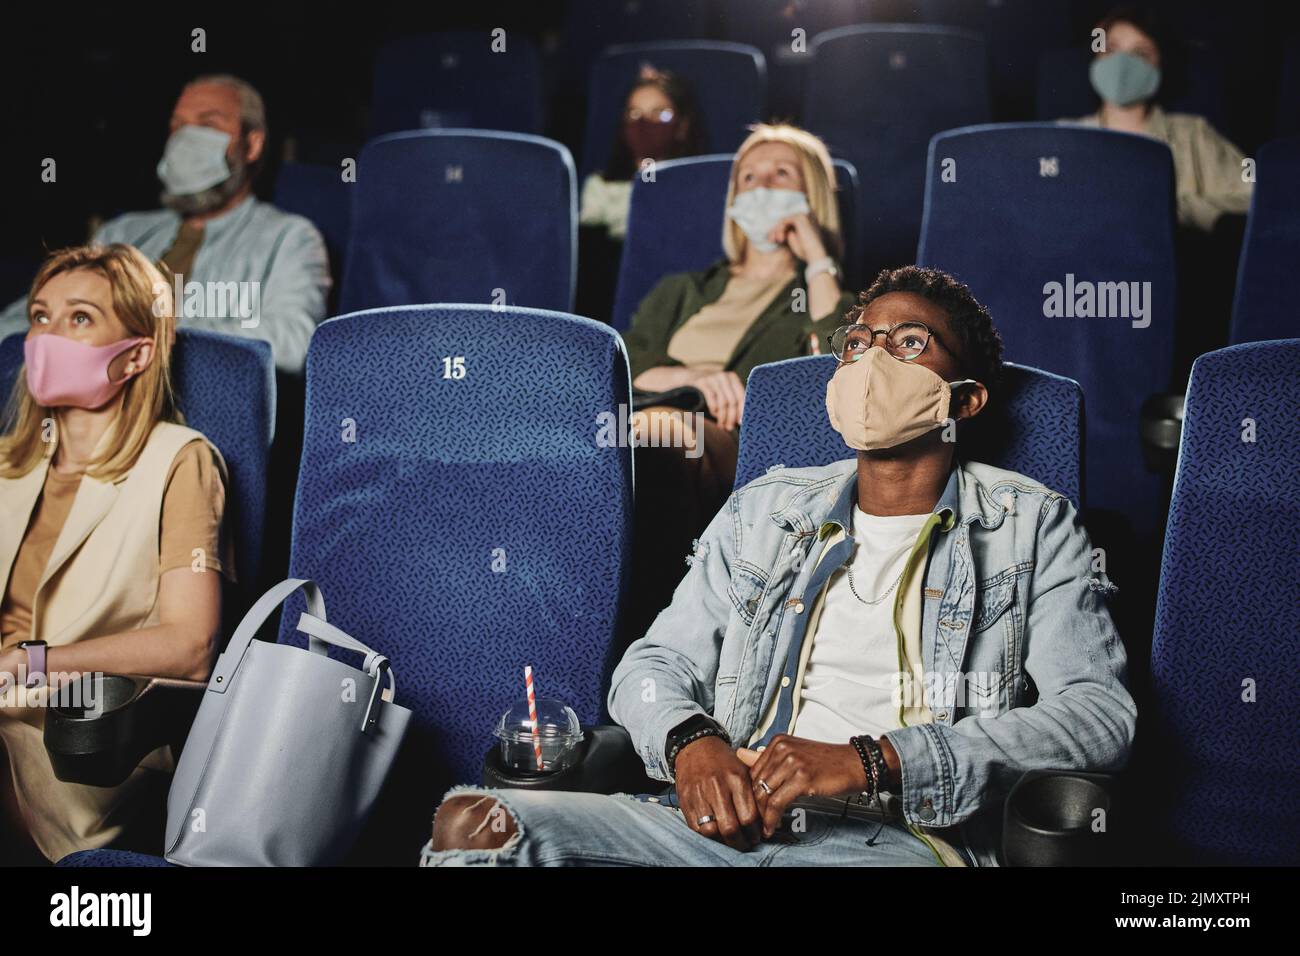 Ethnically diverse group of people wearing protective masks on faces watching film at cinema, quarantine concept Stock Photo